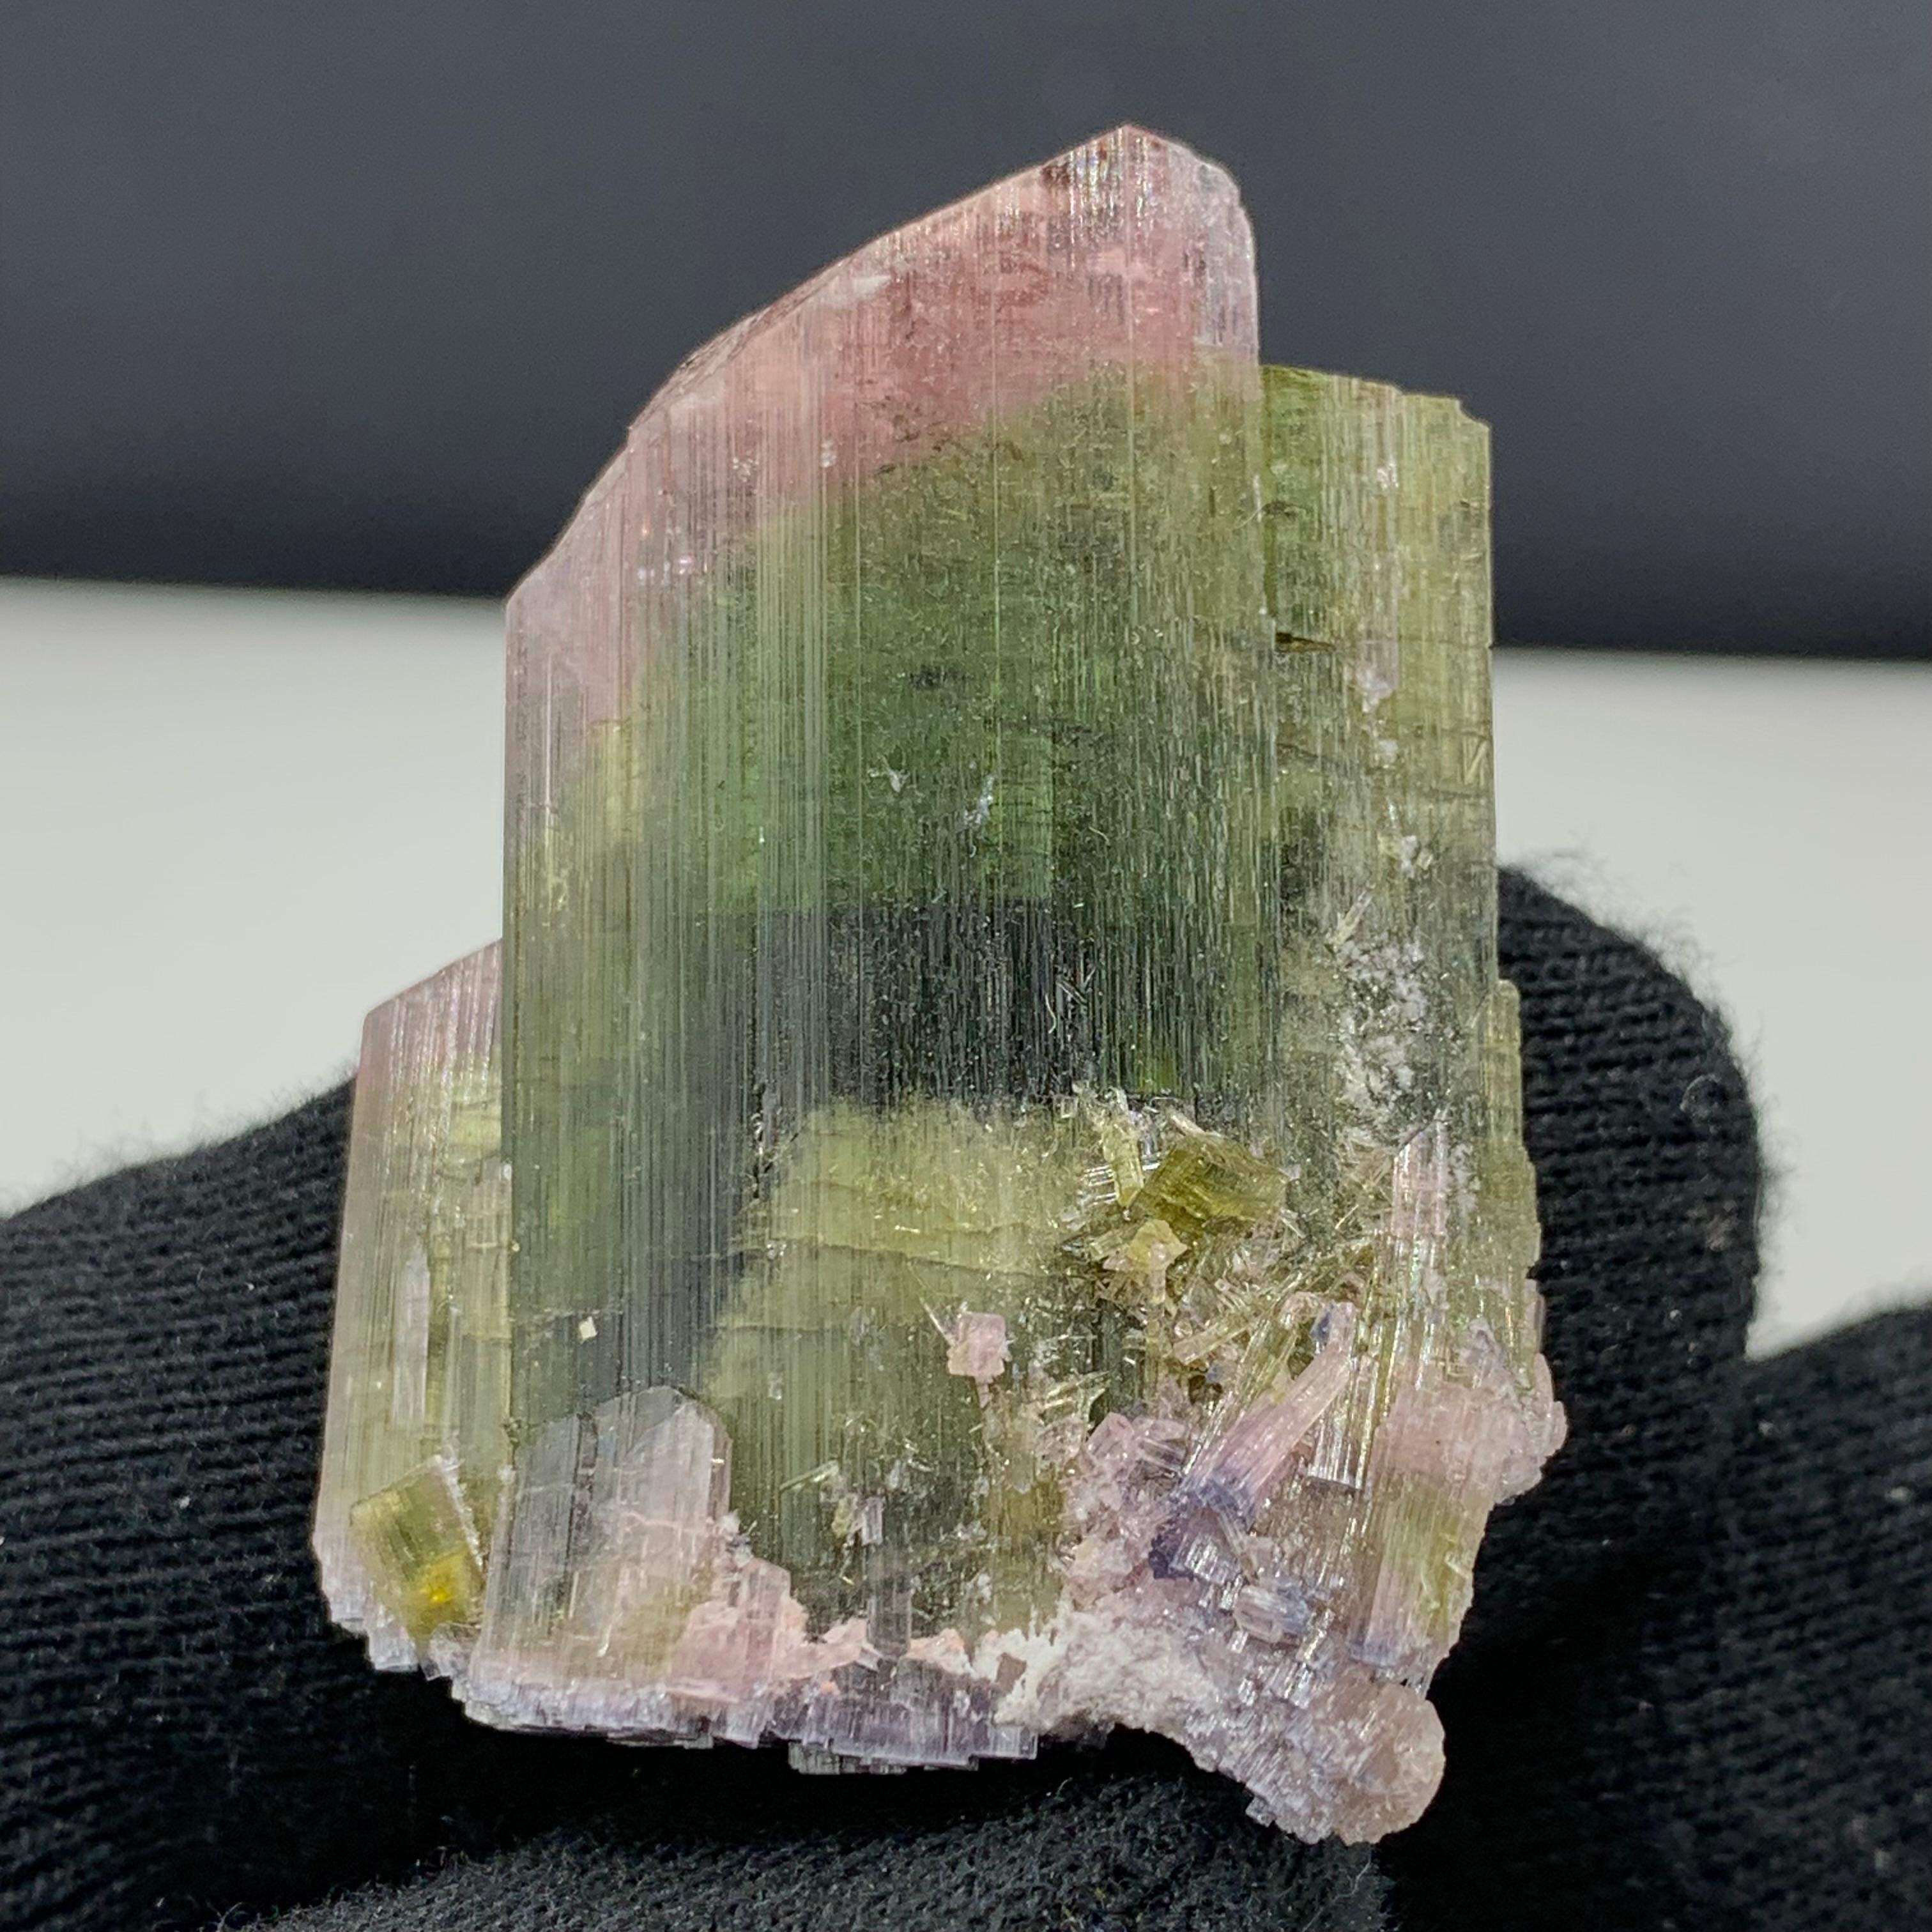 18.50 Gram Pretty Bi Color Tourmaline Specimen From Paprook, Afghanistan 

Weight: 18.50 Gram 
Dimension: 4.5 x 3.3 x 1 Cm
Origin: Paprook,  Afghanistan

Tourmaline is a crystalline silicate mineral group in which boron is compounded with elements